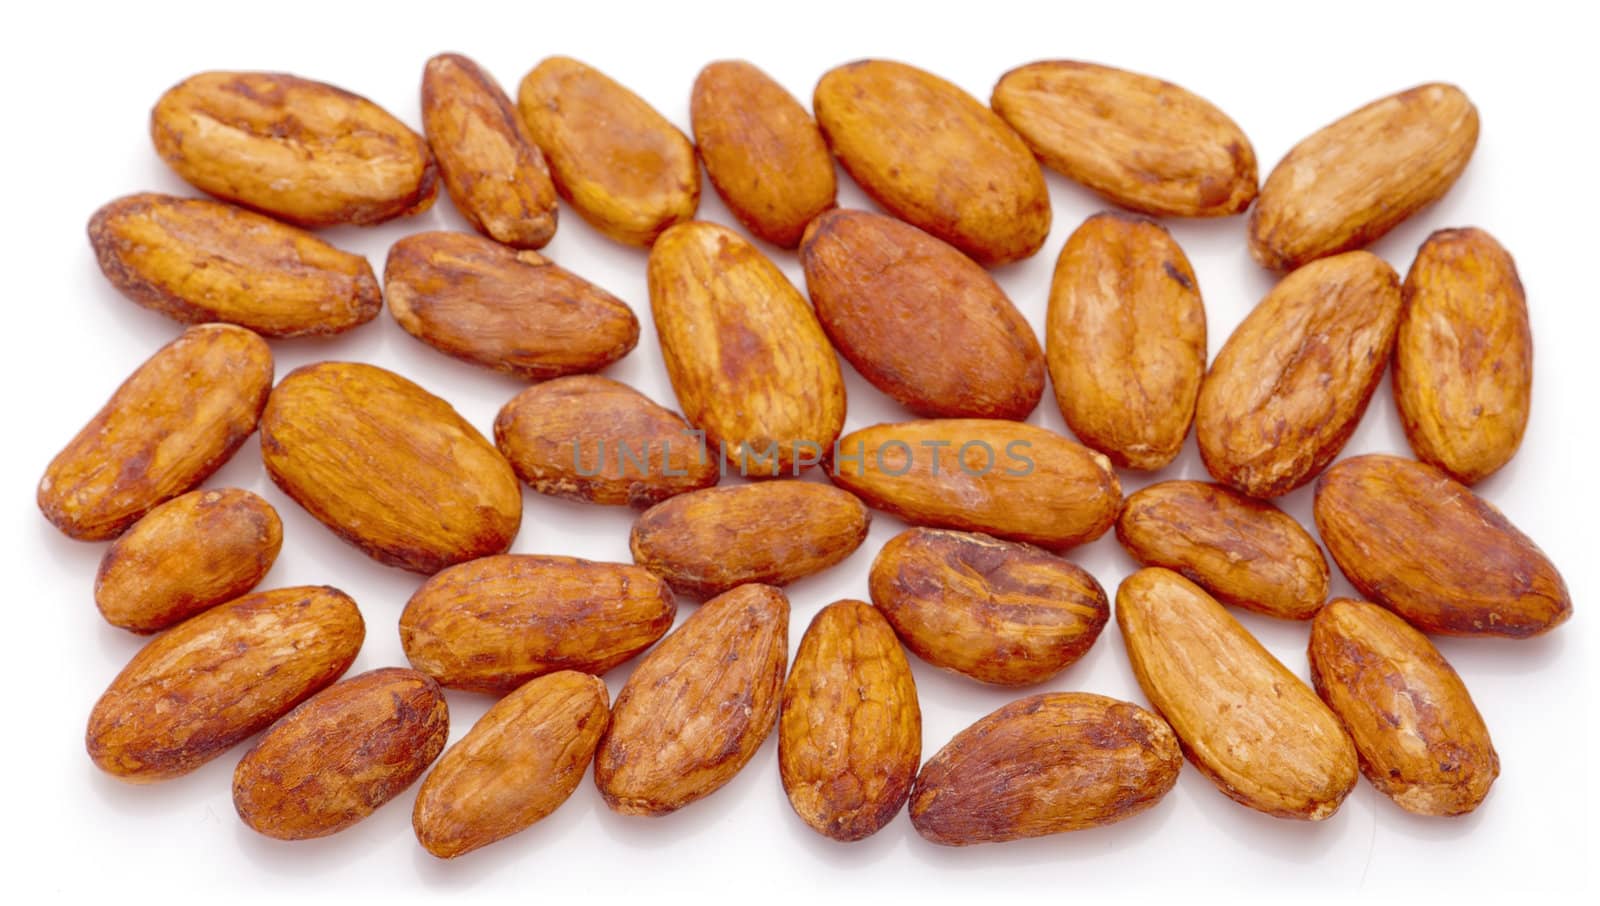 Raw cacao beans arranged in rectangle shape. Isolated on white background.